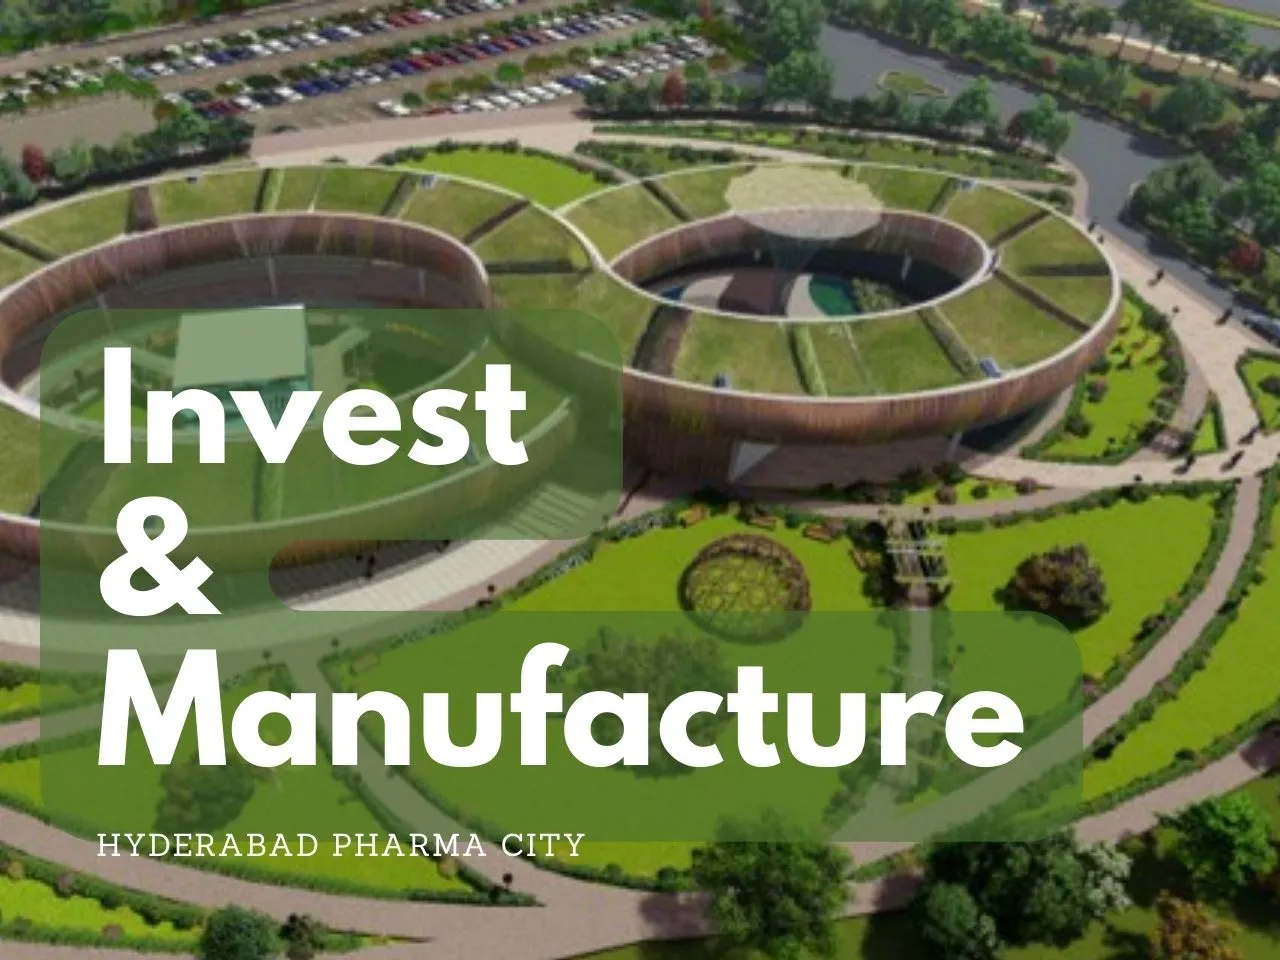 Hyderabad Pharma City Recognized As National Investment & Manufacturing Zone